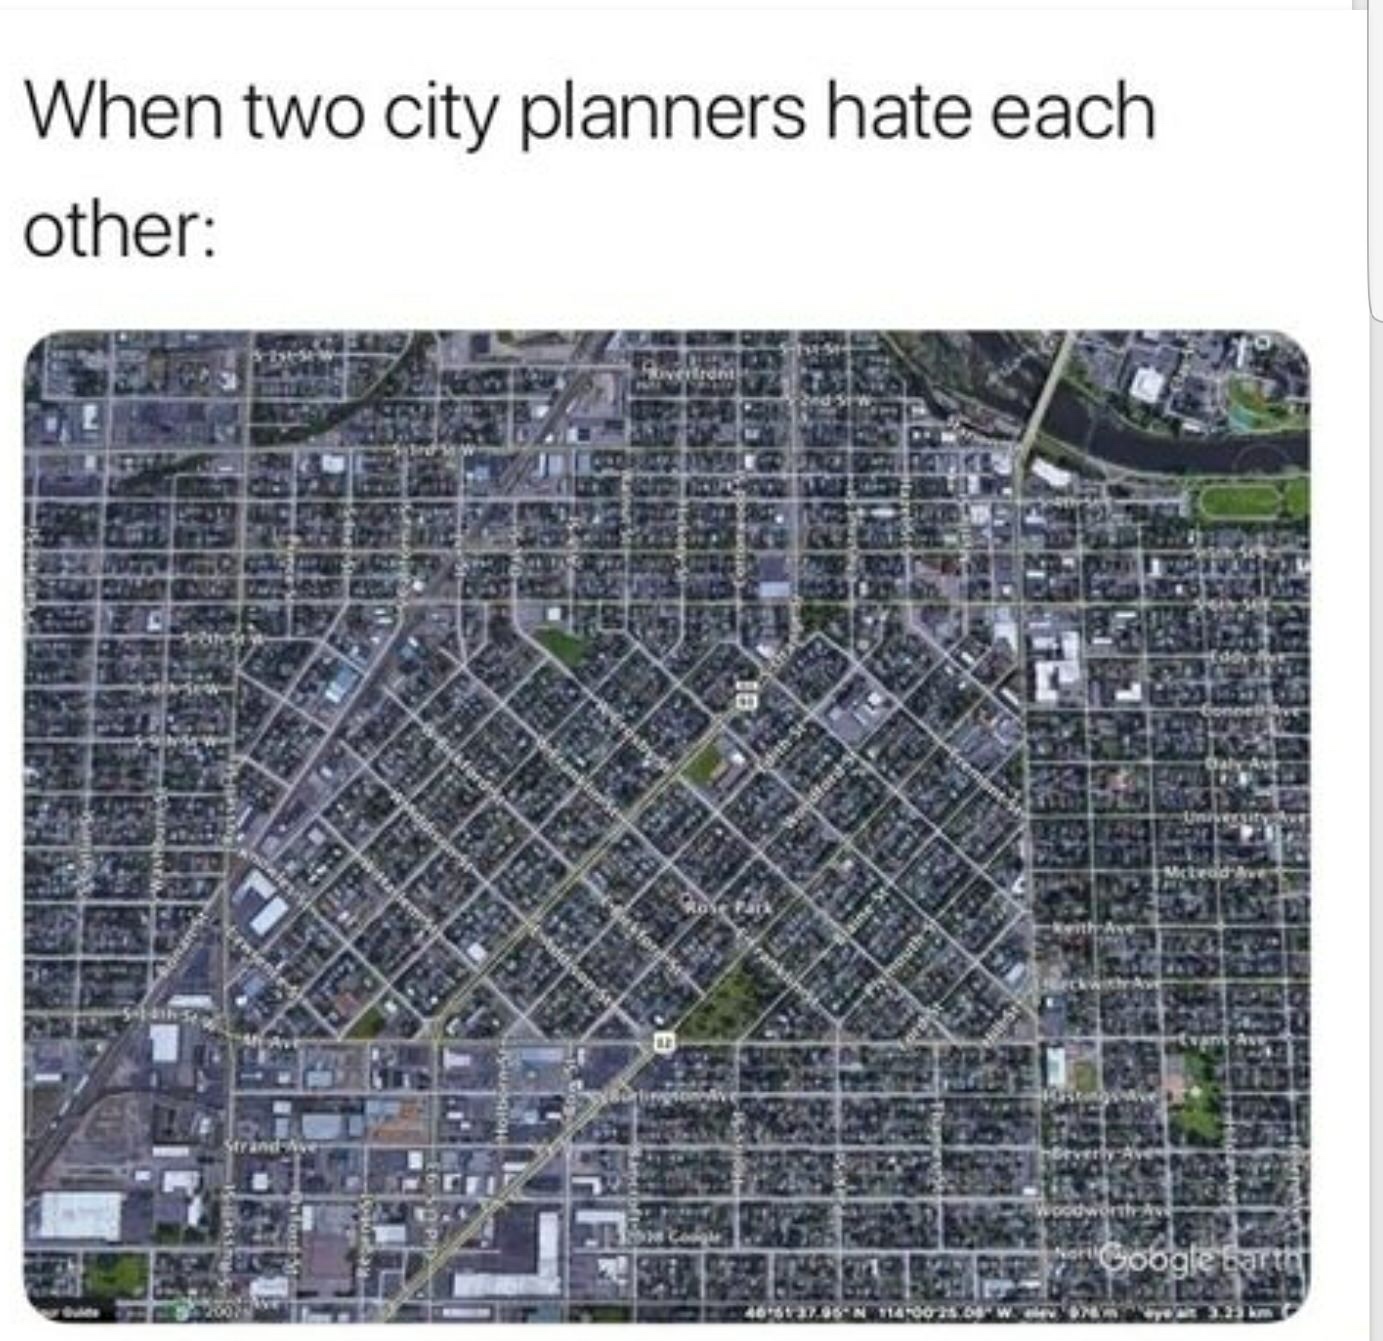 two city planners hate each other - When two city planners hate each other 46512796N 1140 Wa Em Ter